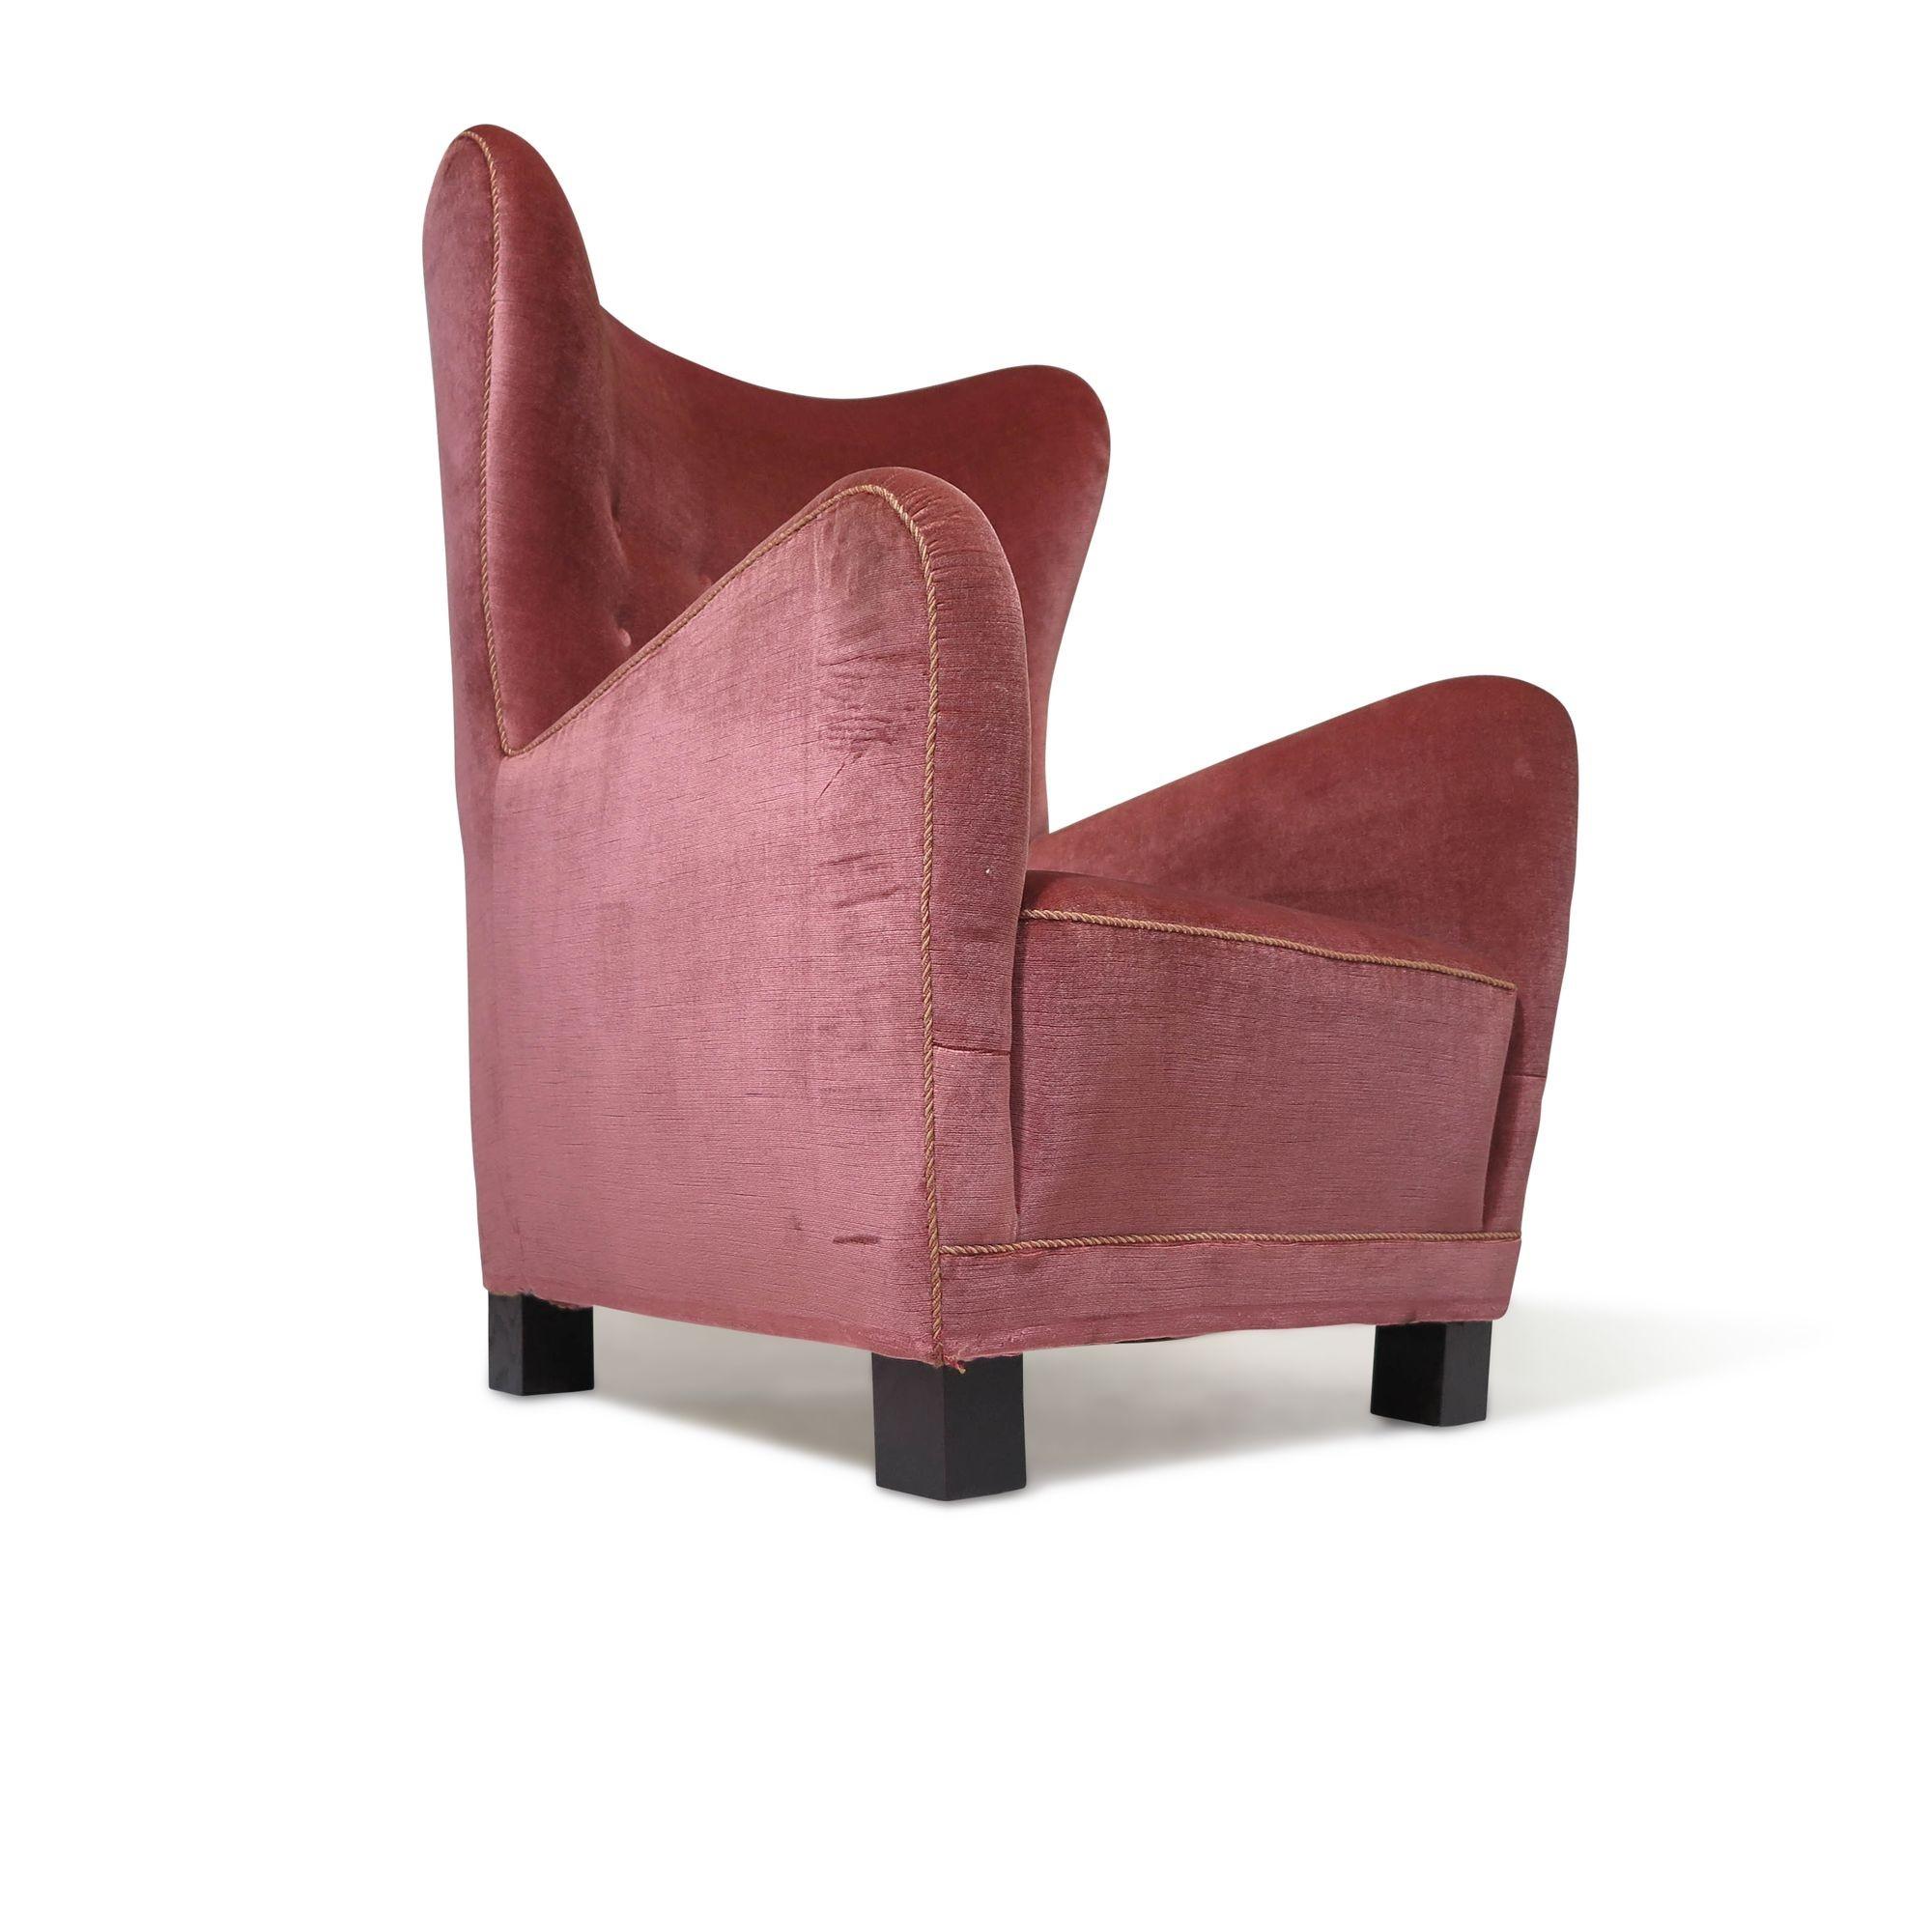 Early Fritz Hansen high-back lounge chair, circa 1942, model #1672, features a solid wood frame, with eight-way hand tied copper coil springs and horsehair padding covered in the original pink mohair. This is a comfortable and stately chair, built